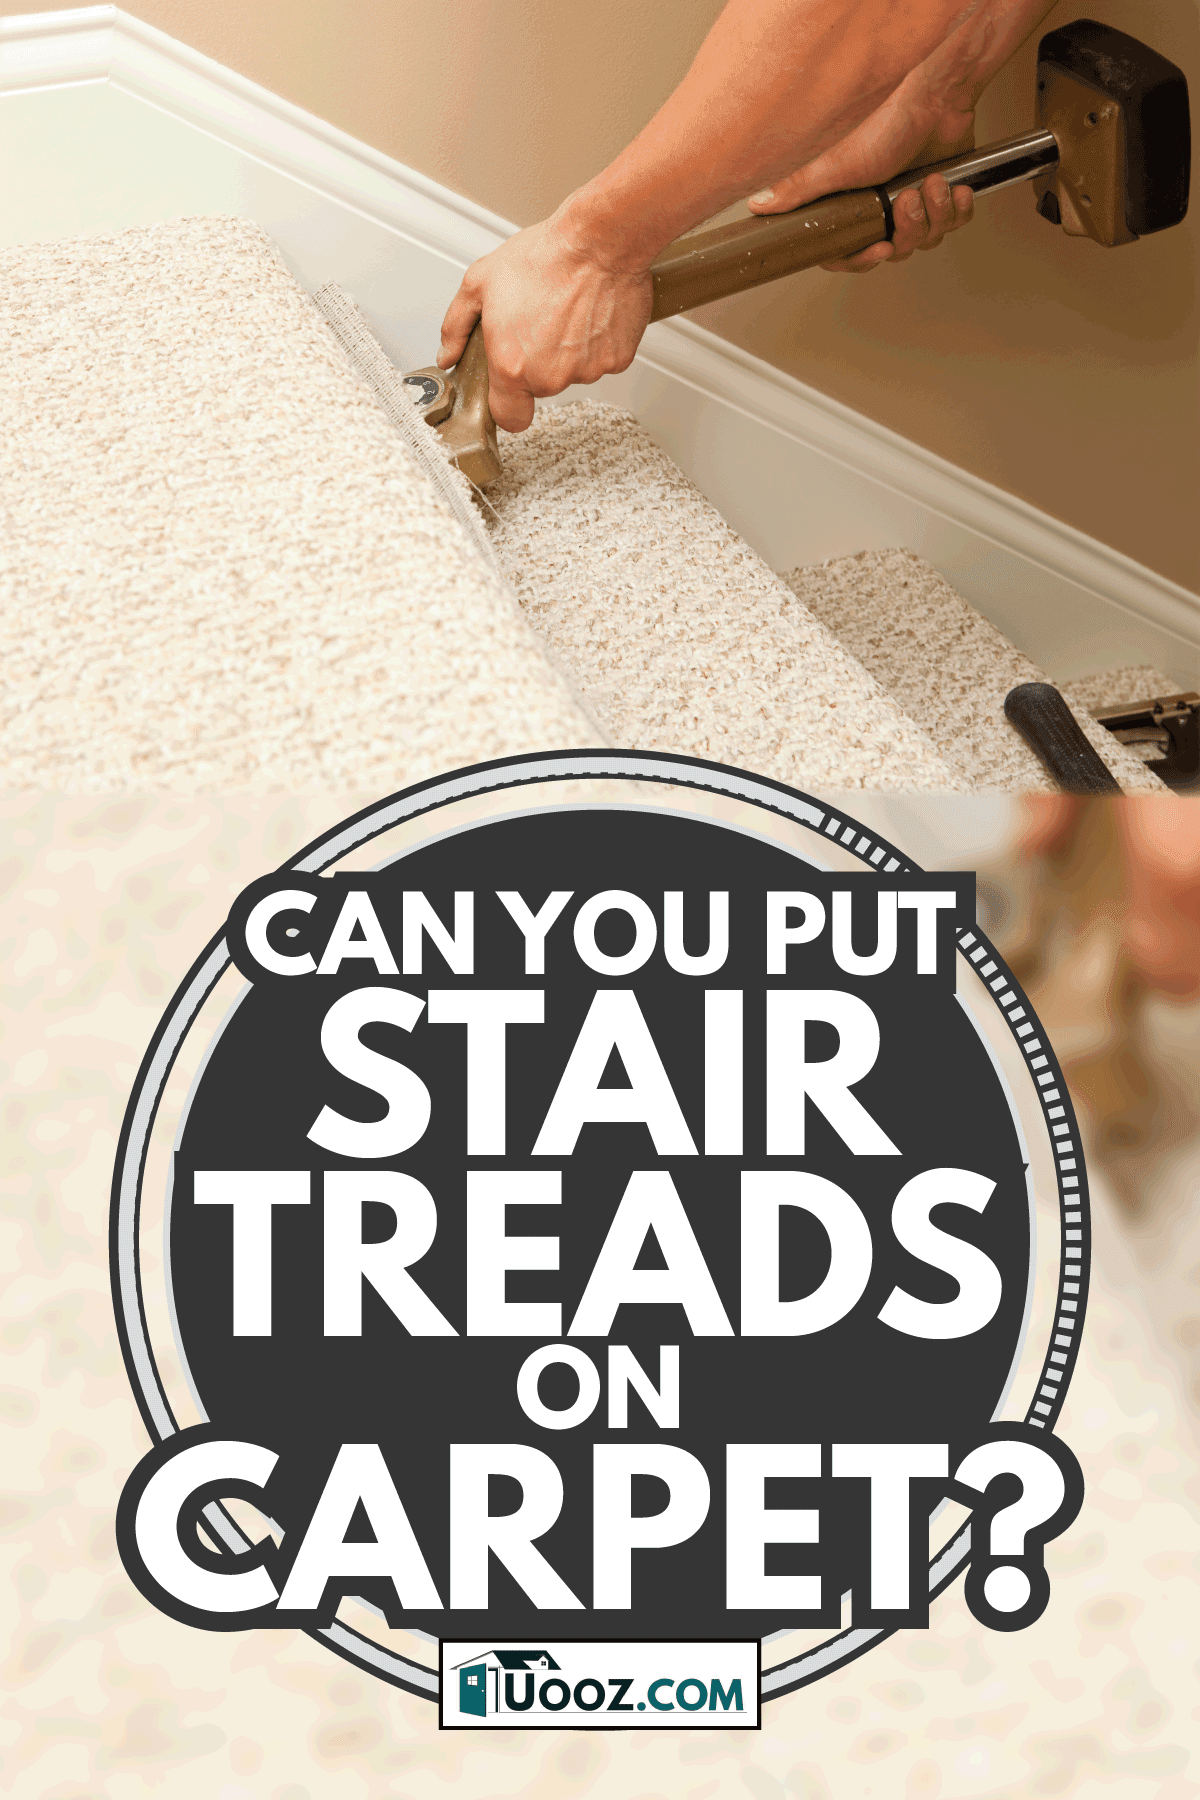 carpet stretcher being used on carpeted stairs. Can You Put Stair Treads On Carpet